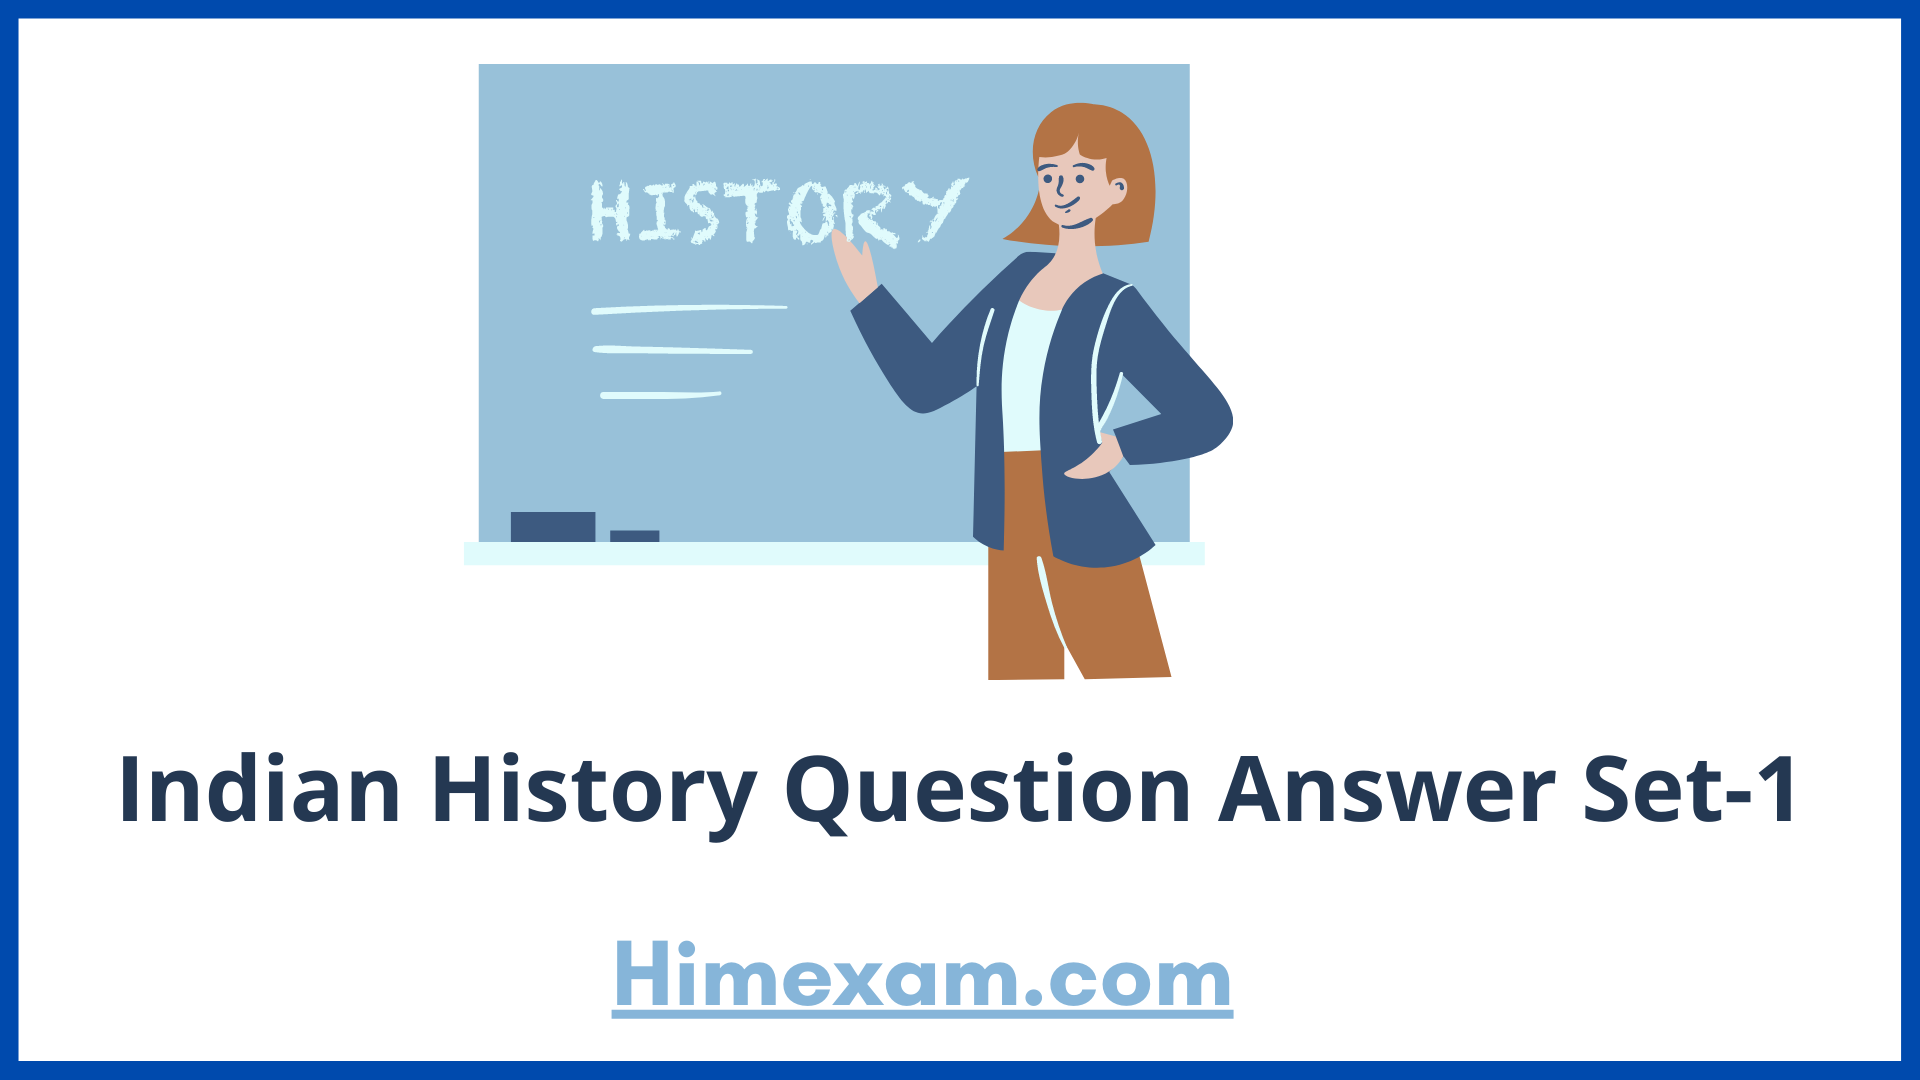 Indian History Question Answer Set-1